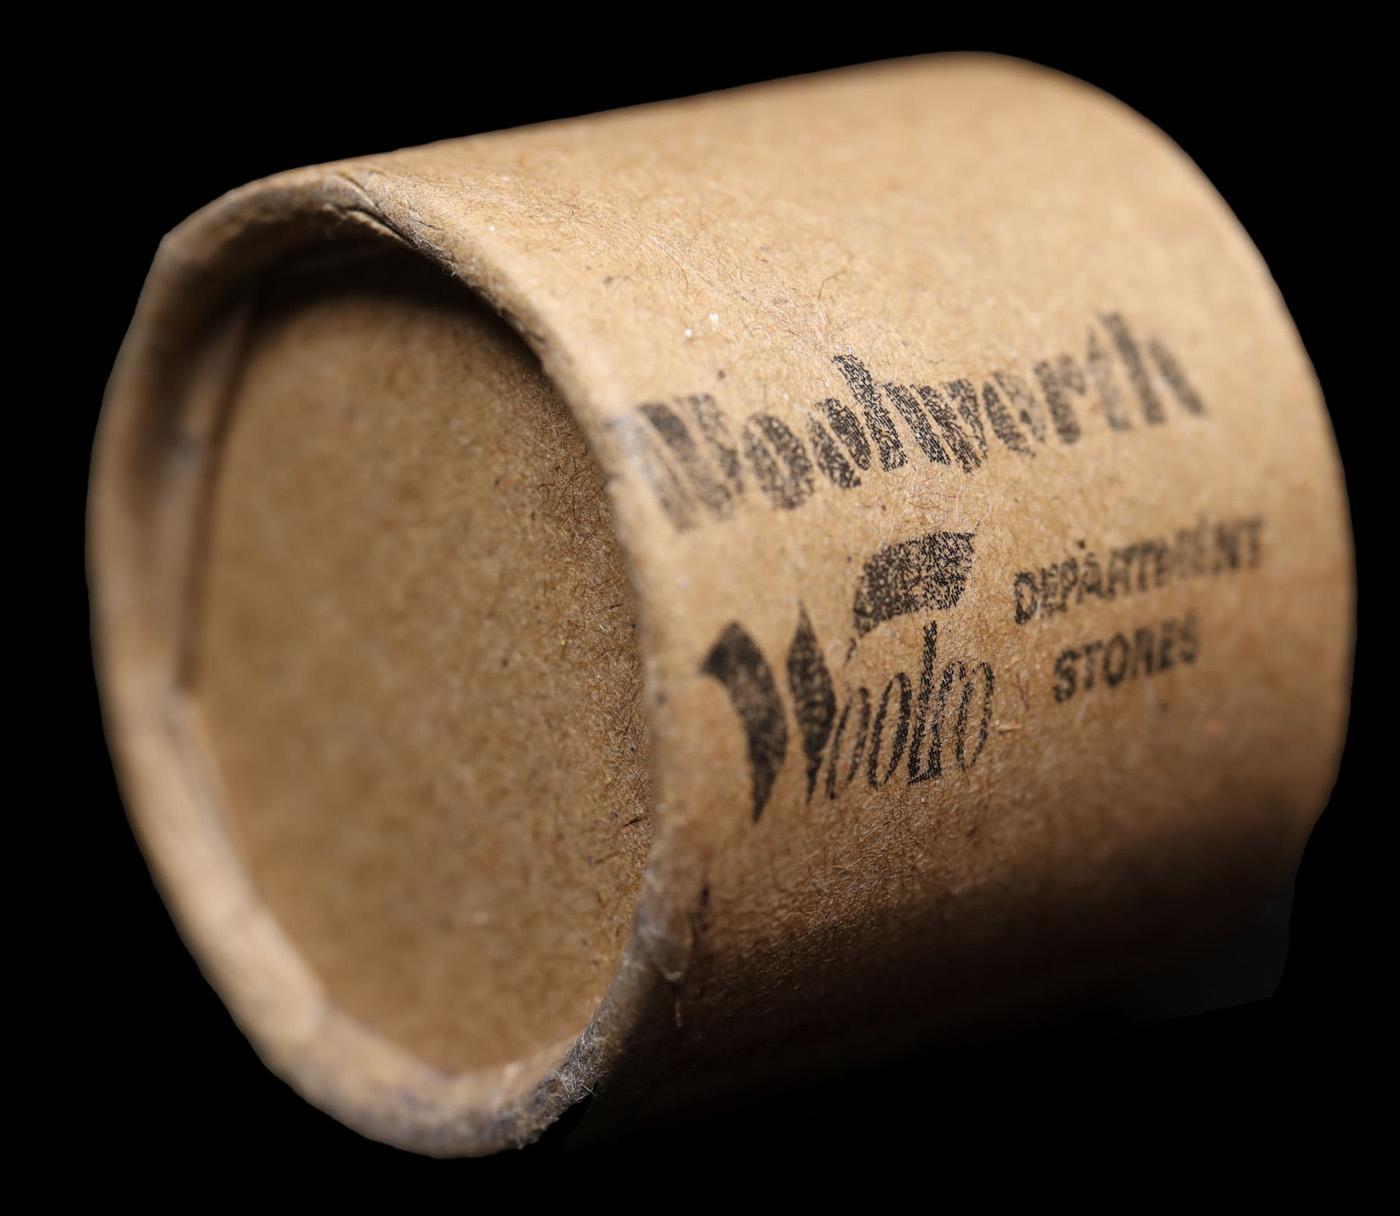 *EXCLUSIVE* x10 Mixed Covered End Roll! Marked "Morgan/Peace Limited"! - Huge Vault Hoard  (FC)